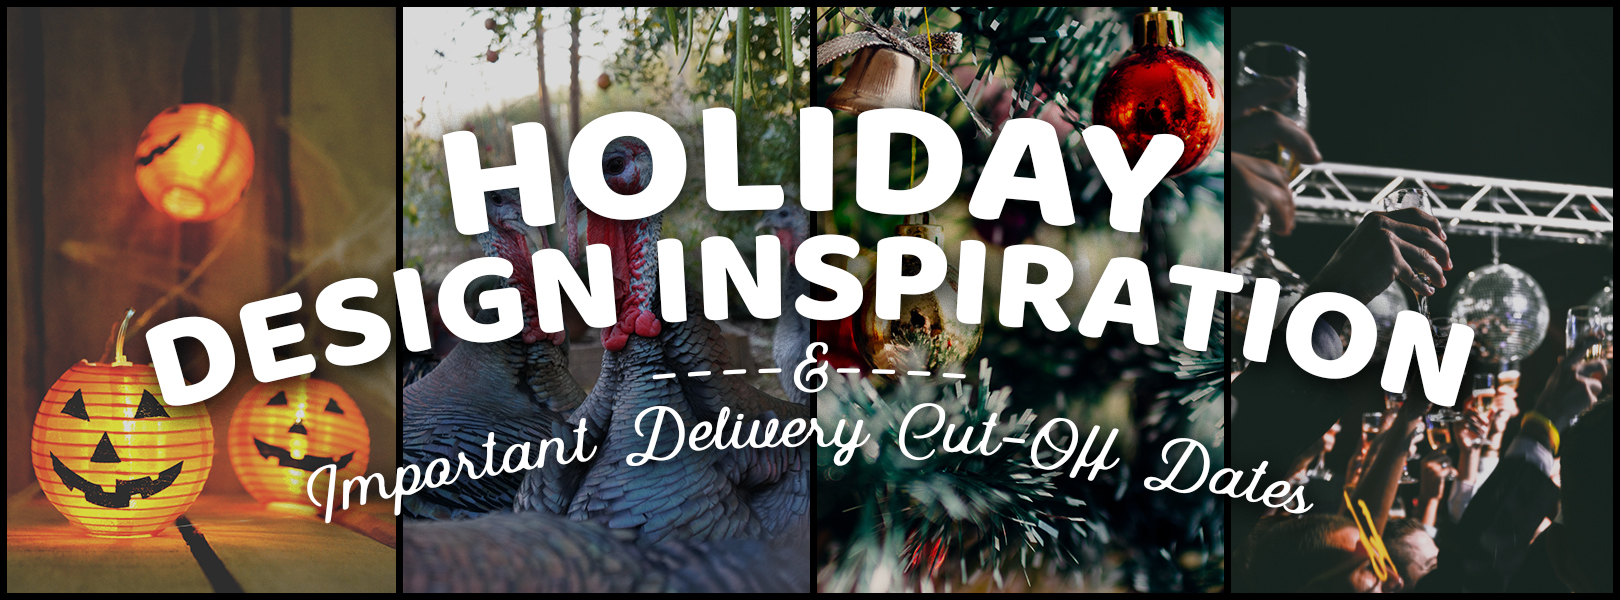 Holiday Design Inspiration & Important Delivery Cut-Off Dates